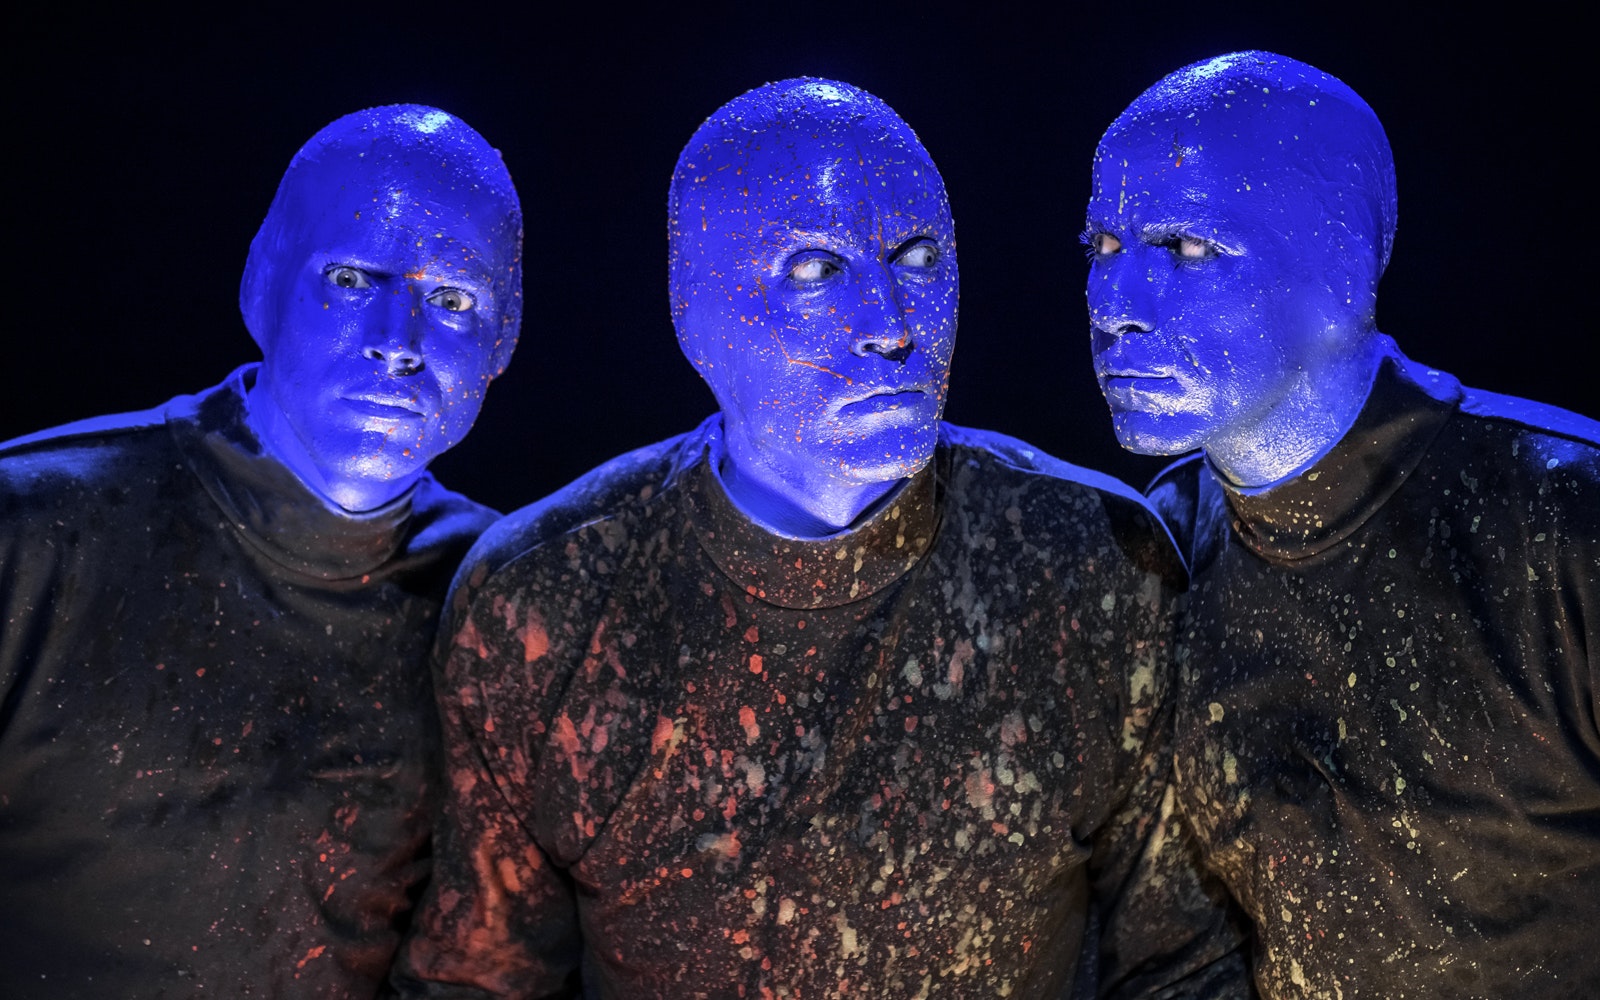 "I didn't know the Blue Man Group was hiring." - wide 1